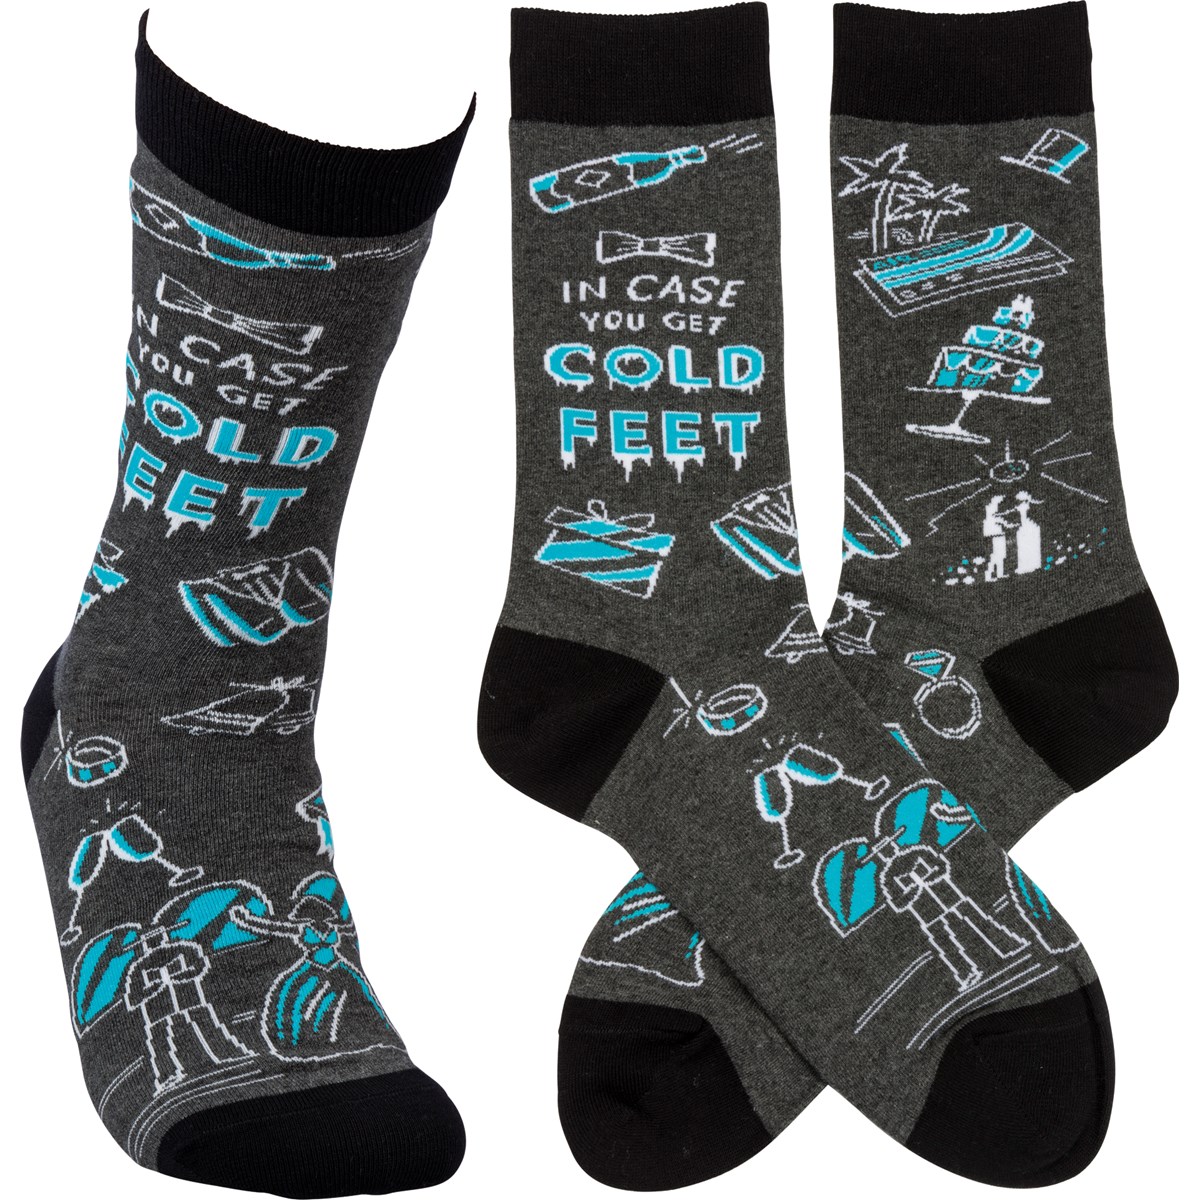 Socks - In Case You Get Cold Feet - One Size Fits Most - Cotton, Nylon, Spandex